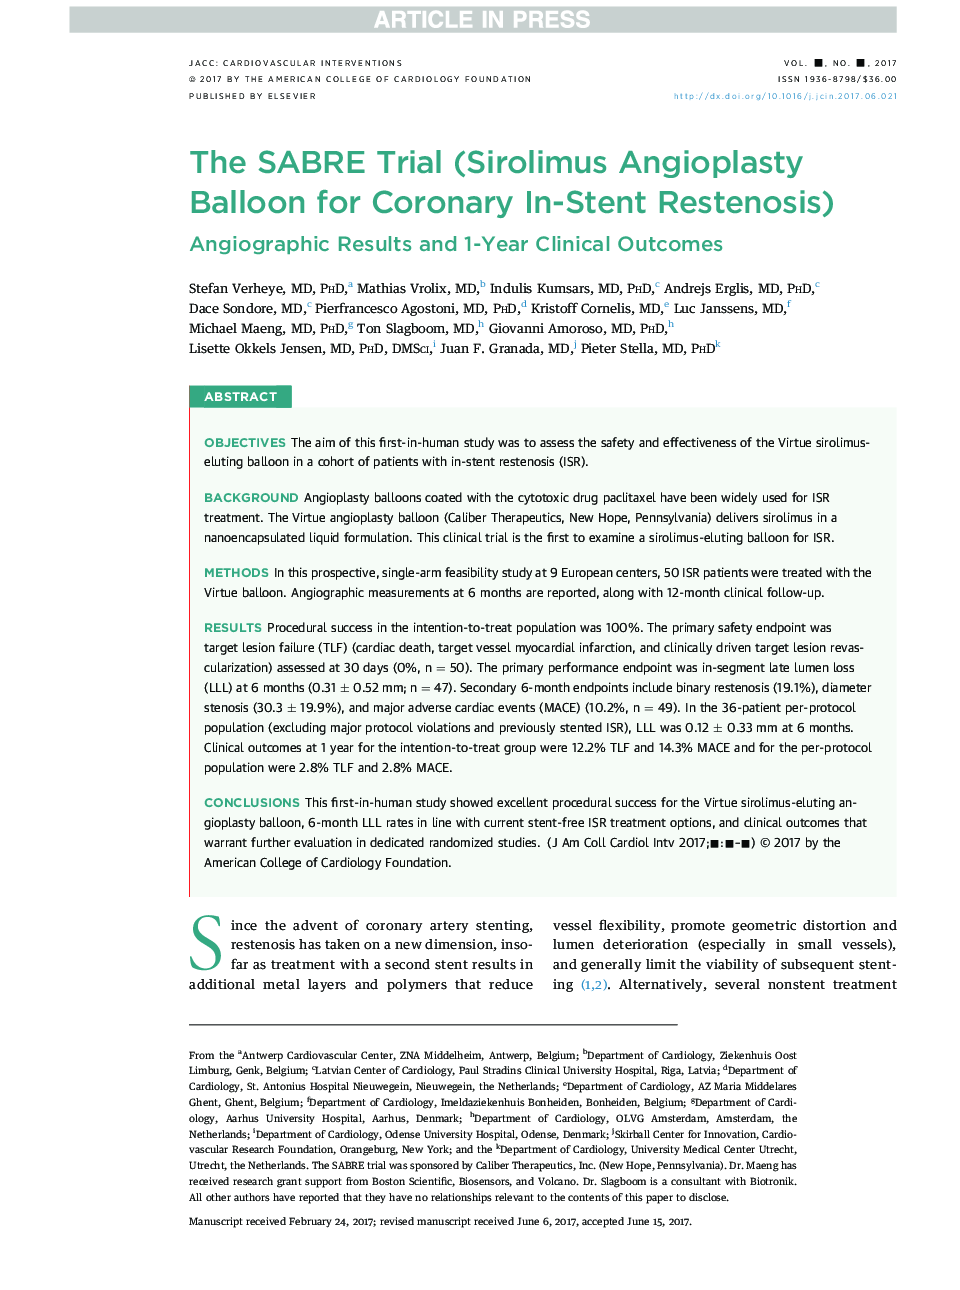 The SABRE Trial (Sirolimus Angioplasty Balloon forÂ Coronary In-Stent Restenosis)